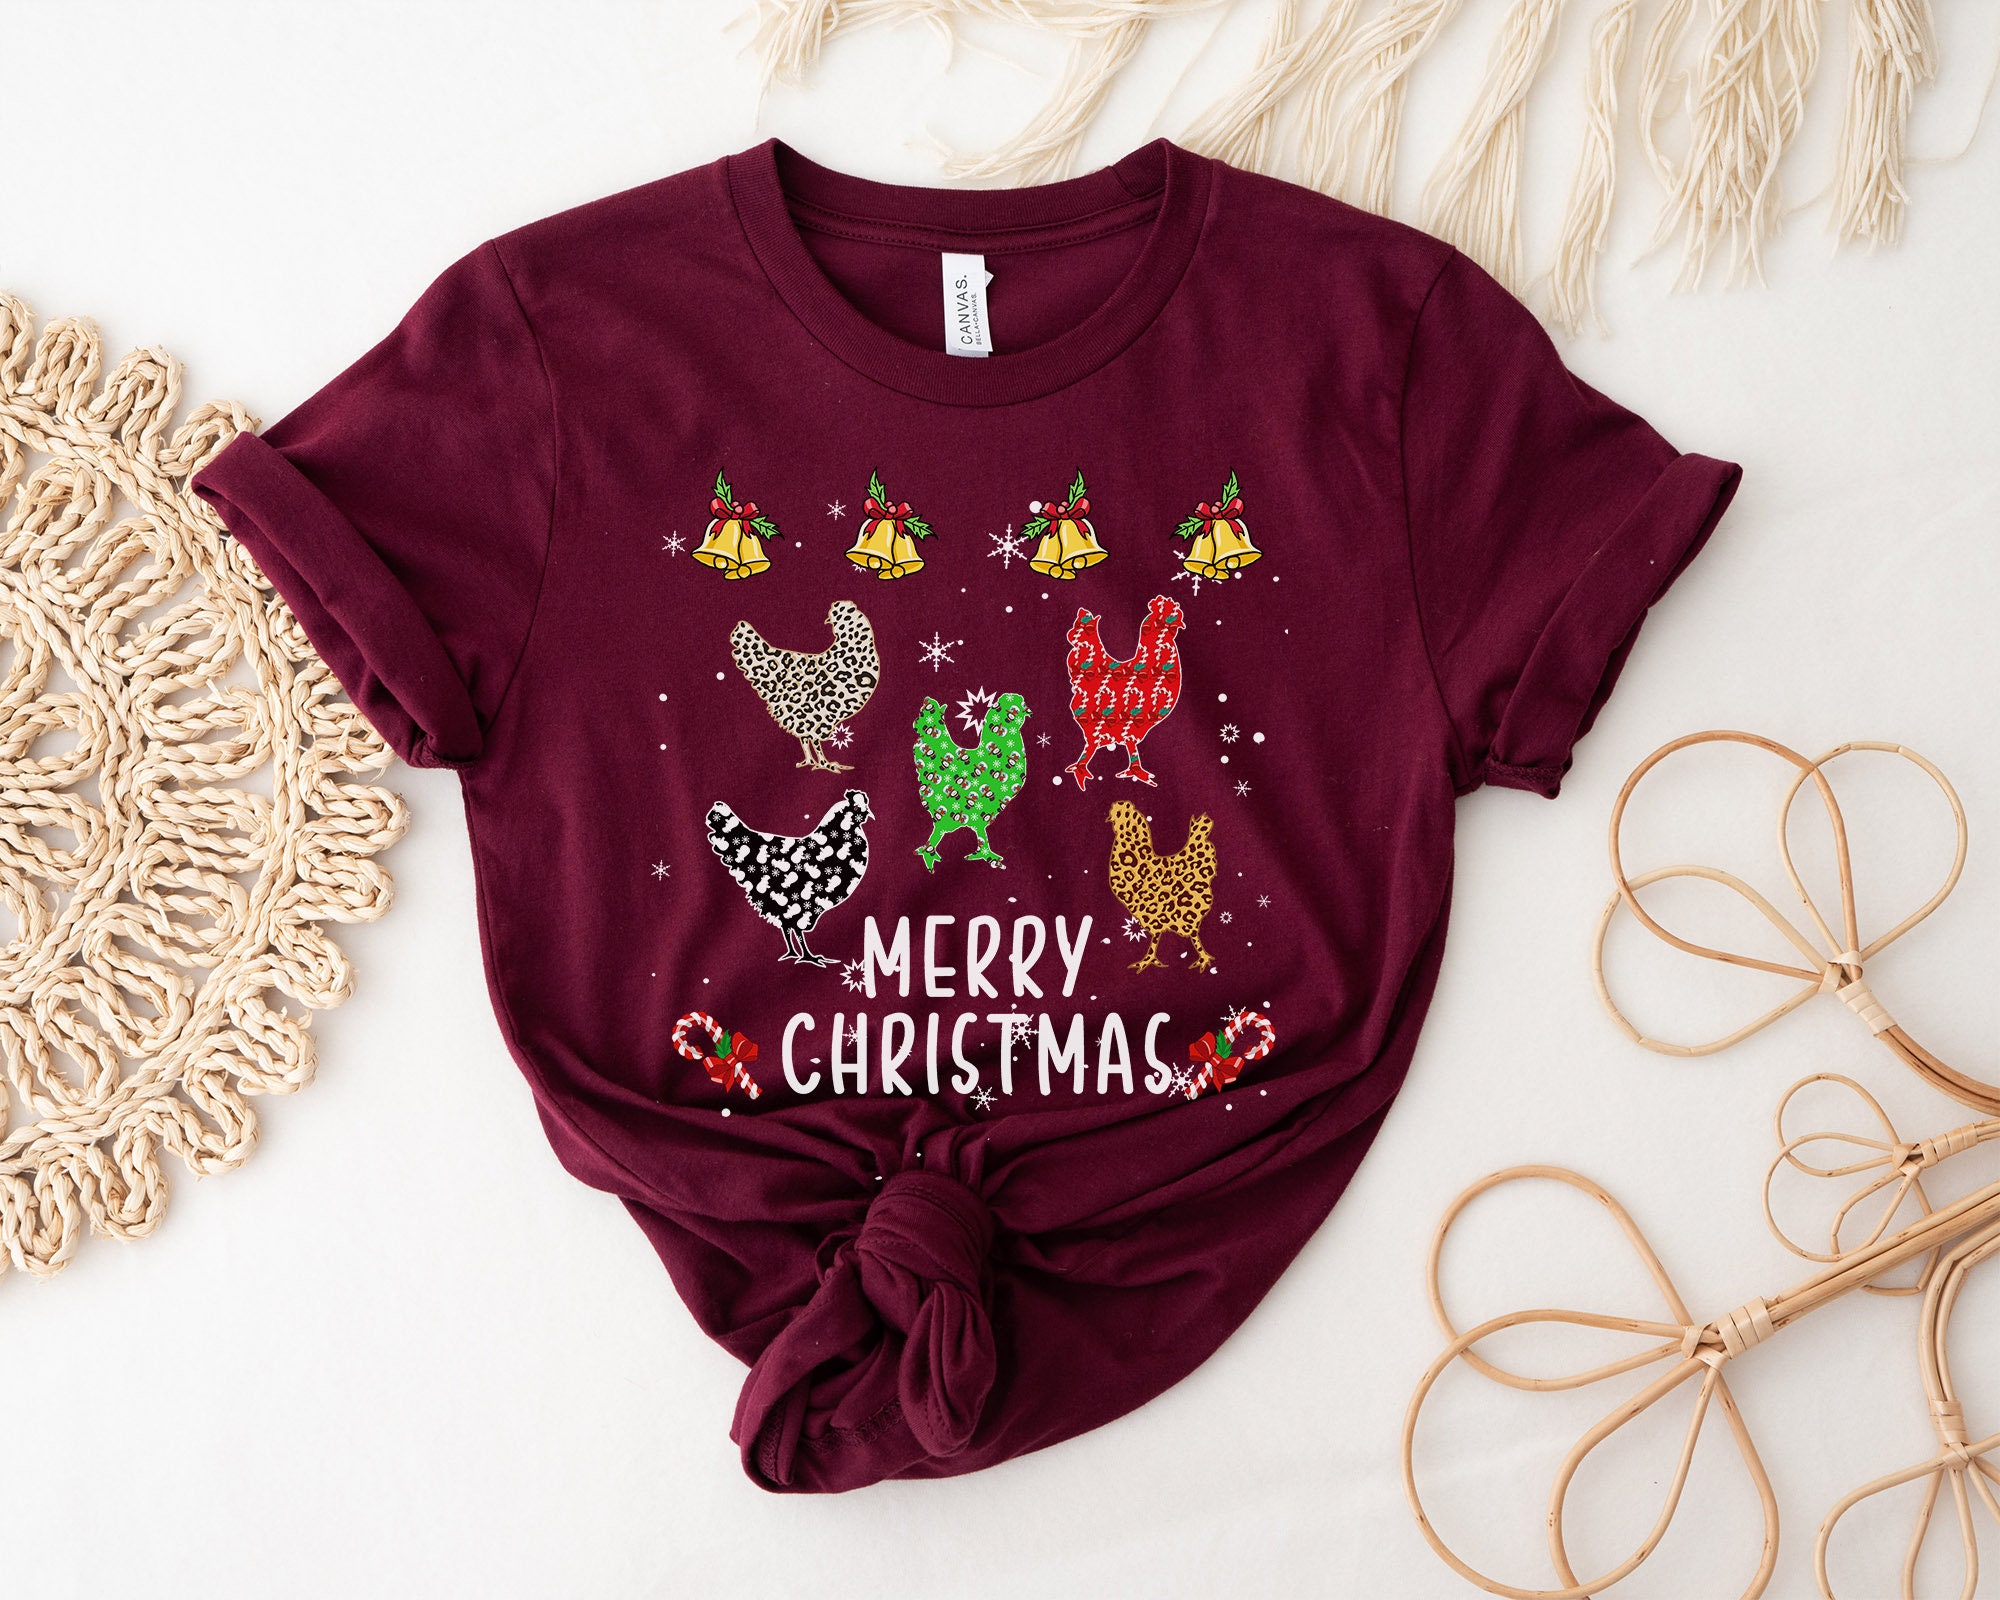 Discover Merry Christmas Chicken Shirt, Funny Christmas Shirt, Chicken Owner Shirt, Funny Chicken Tshirt, Gift For Chicken Lover, Farm Shirt, Poultry